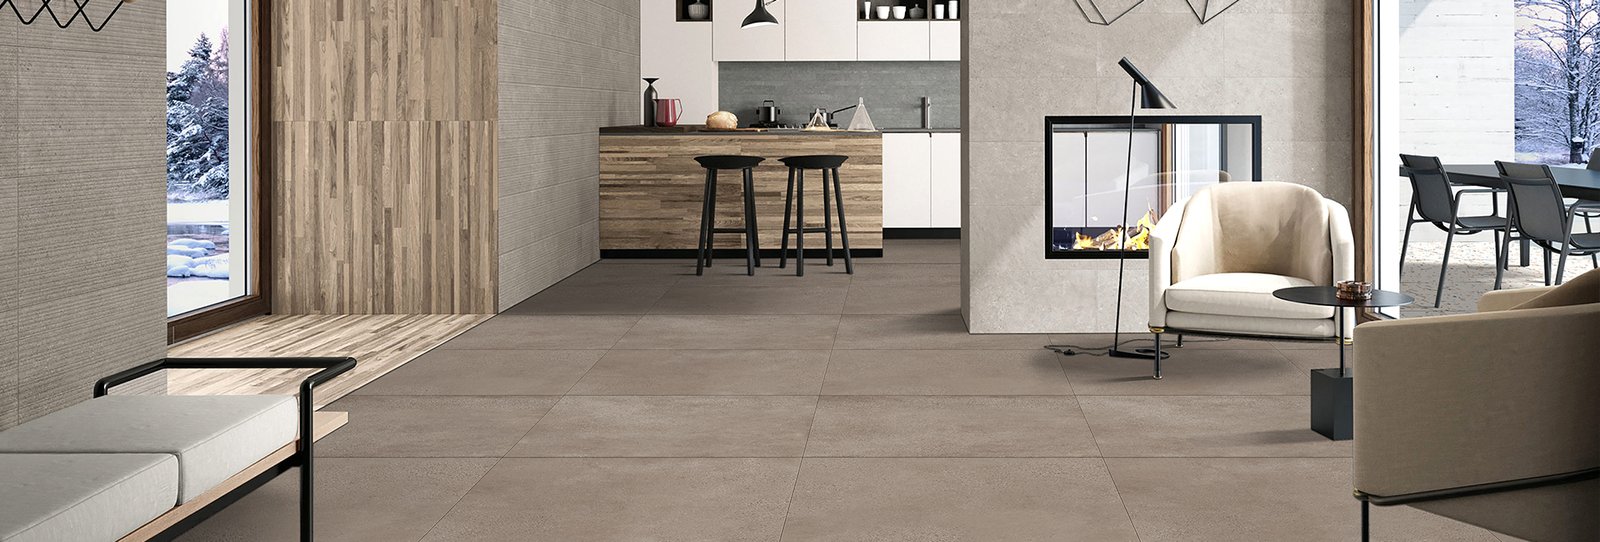 Real Granito's Matt Tile Collection for kitchen